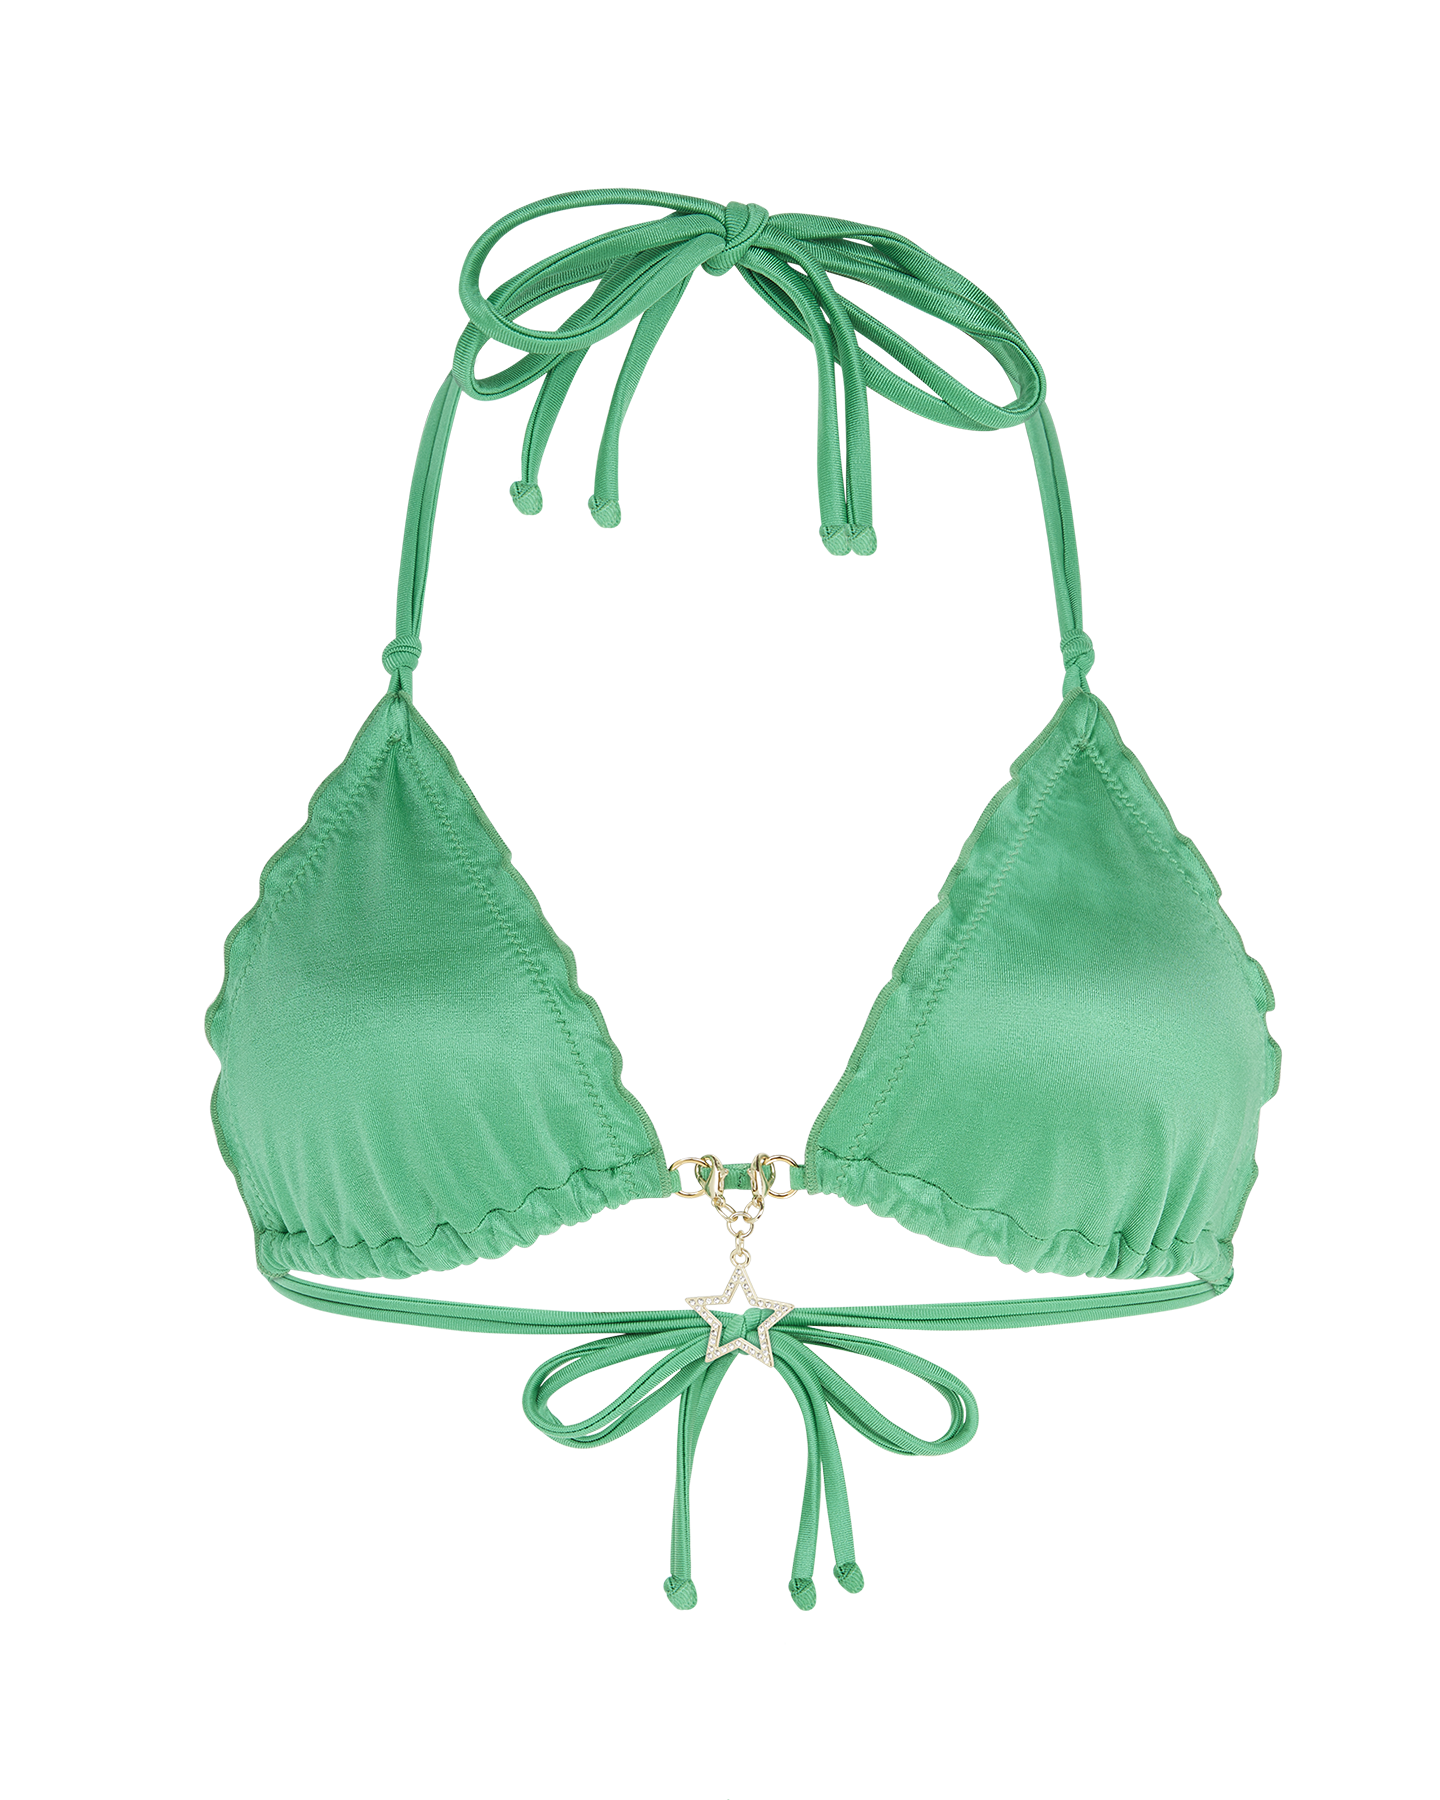 Berry 1 Bikini Top | By Agent Provocateur New In